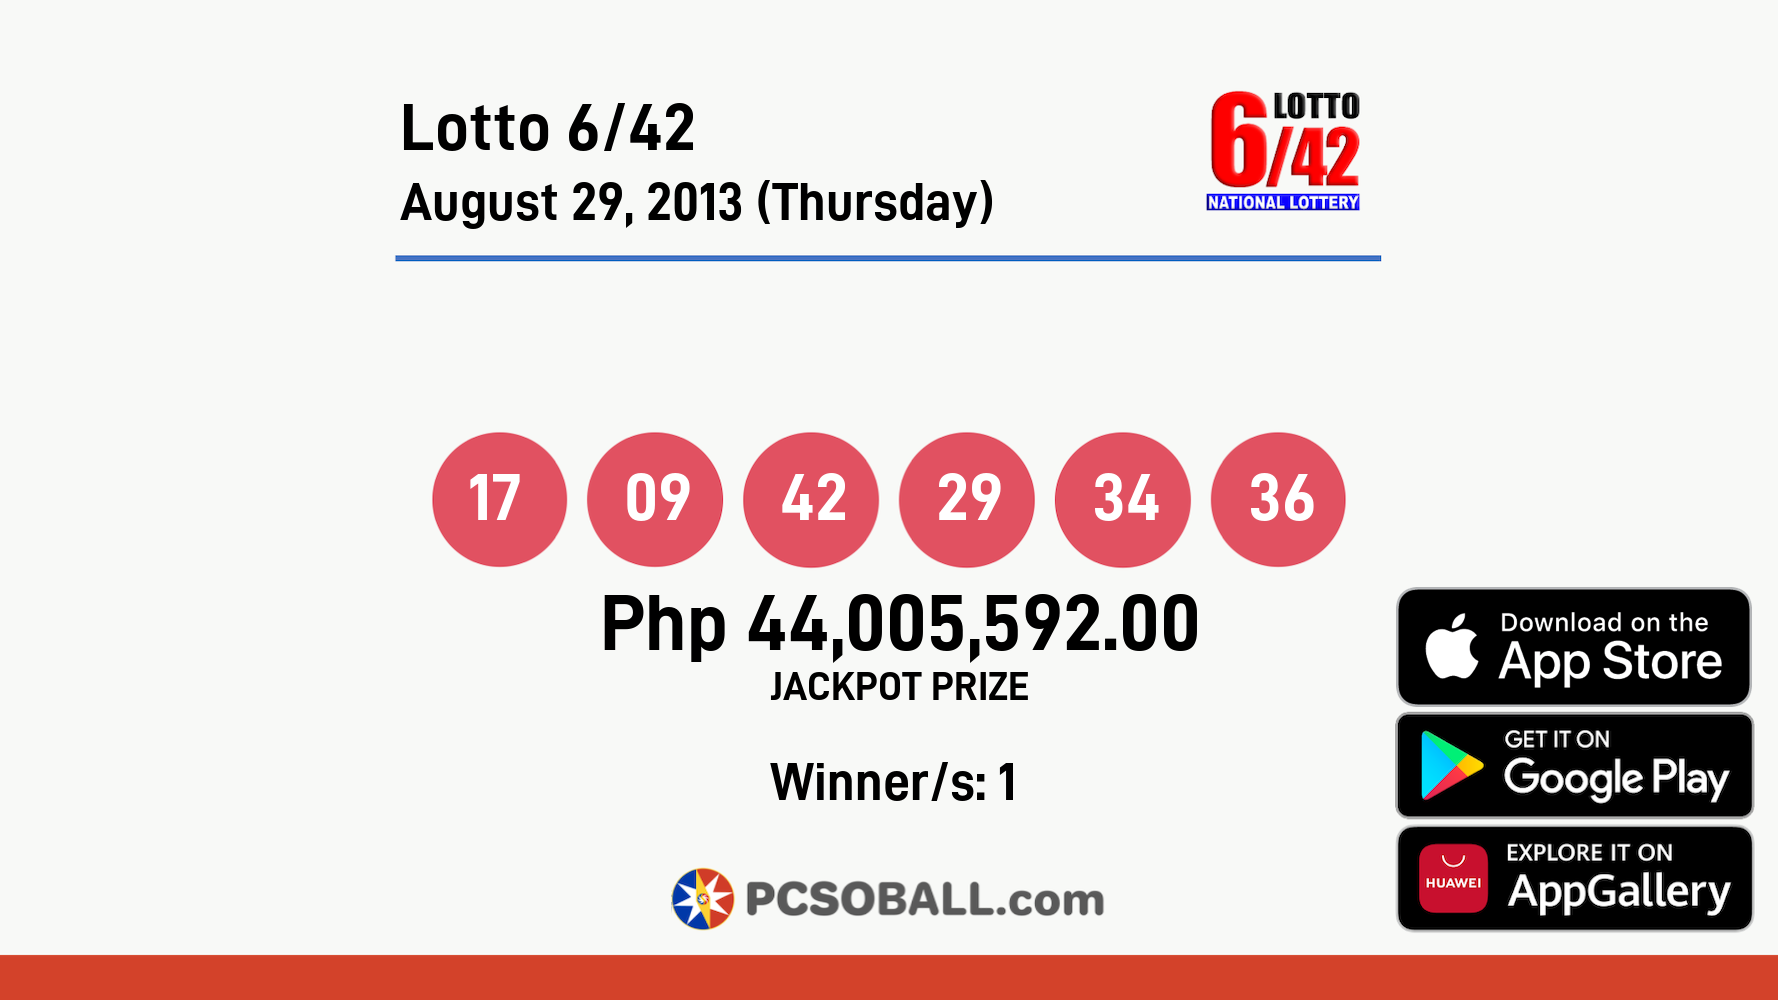 Lotto 6/42 August 29, 2013 (Thursday) Result